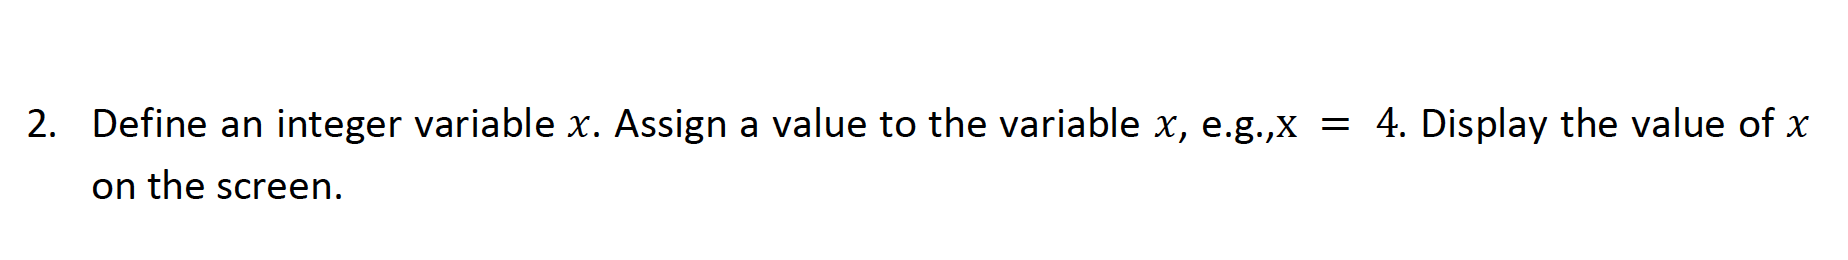 2. Define an integer variable x. Assign a value to the variable x, e.g.,x = 4. Display the value of x
on the screen.
